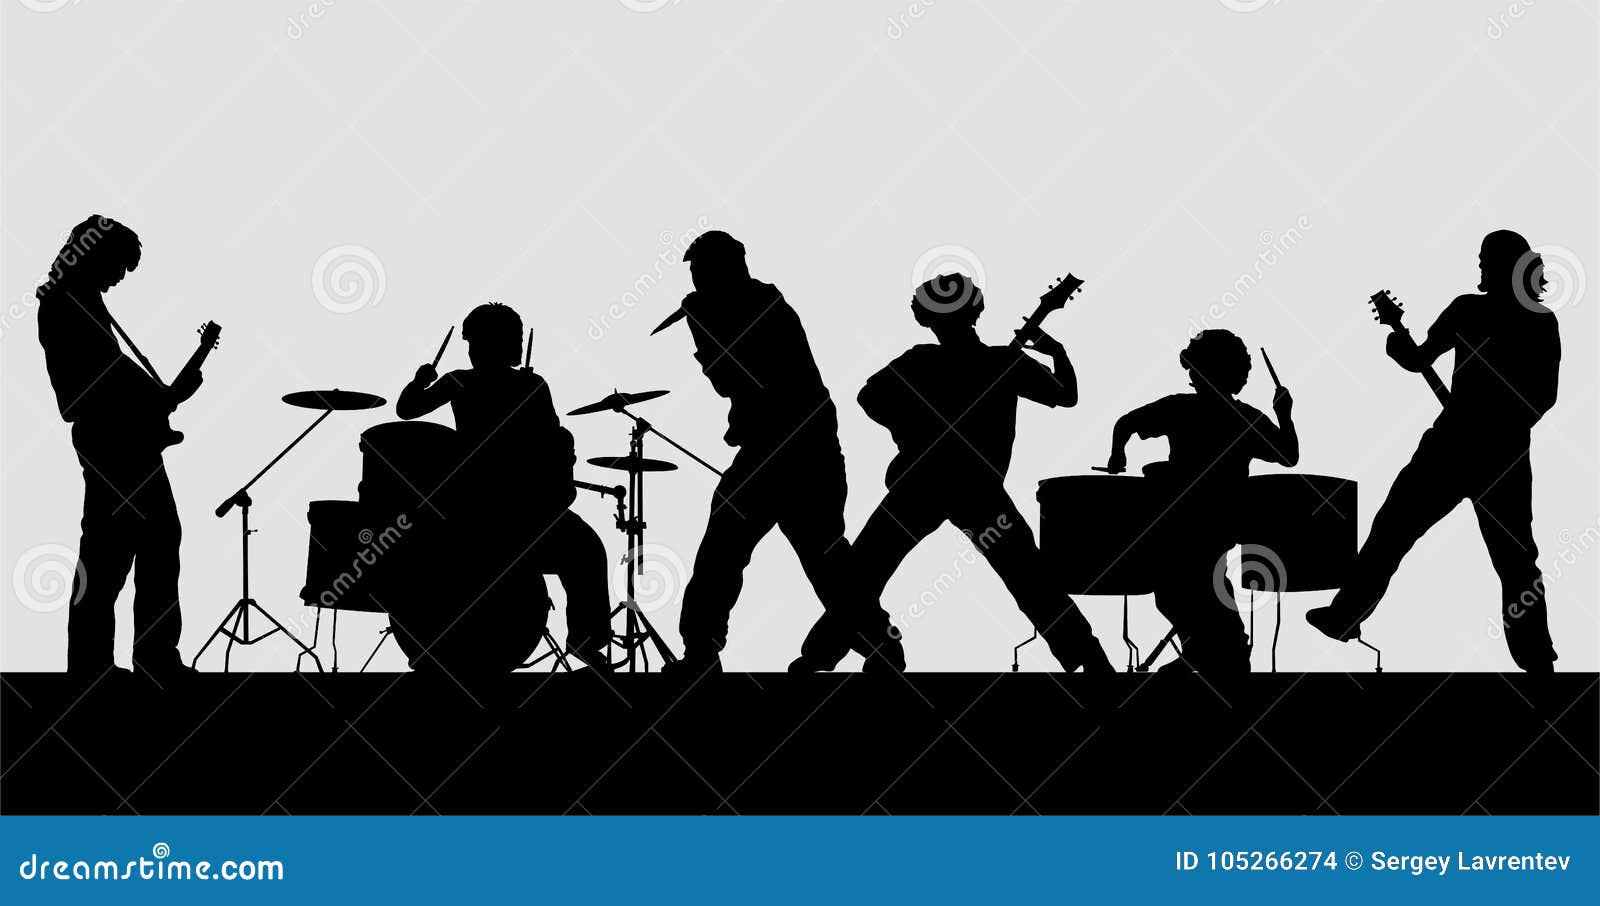 rock band silhouette on stage